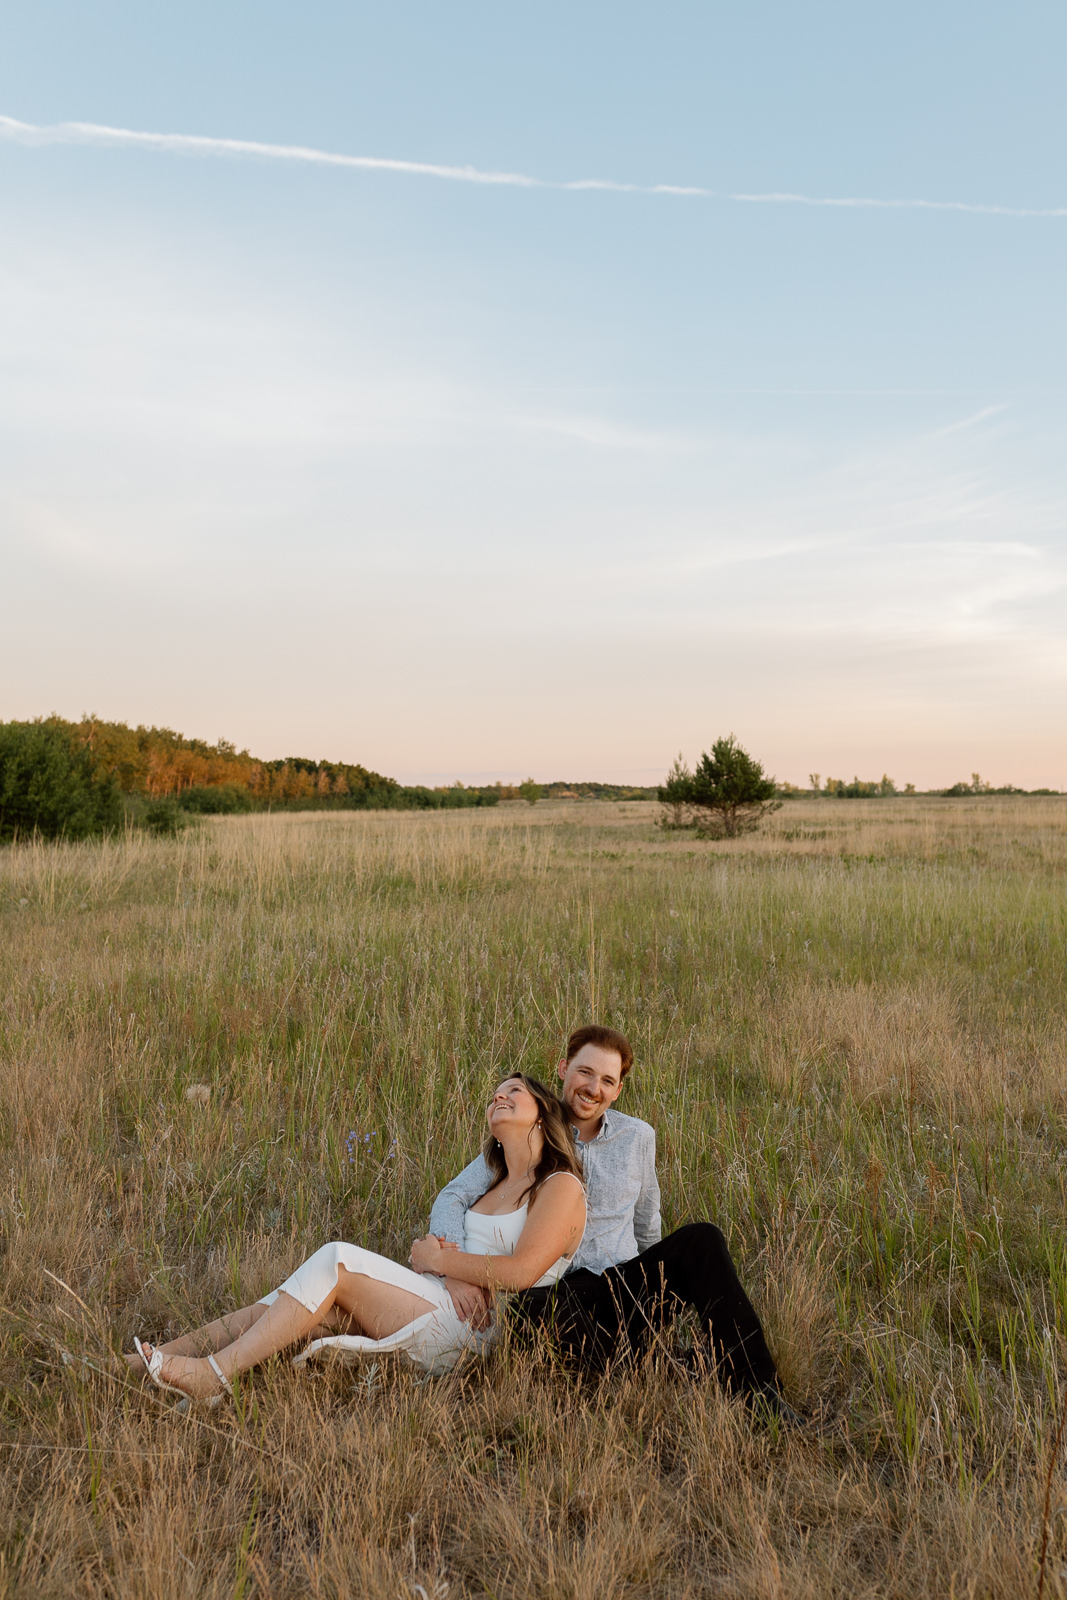 Man & Woman laughing in a field